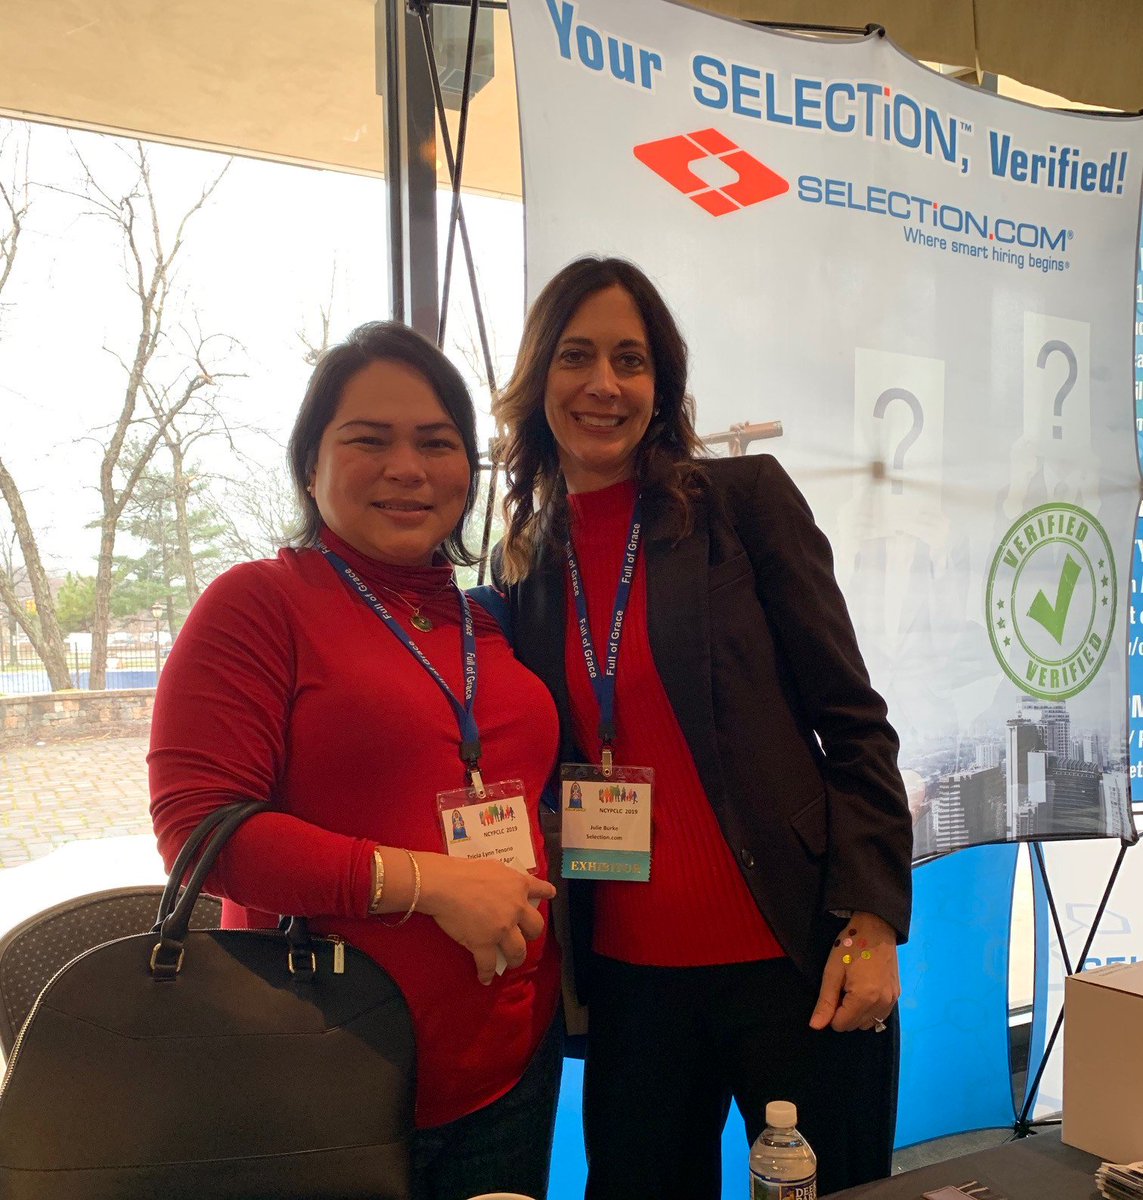 We're proud to sponsor the @cypclc conference. This year, our sponsorship fully paid for Tricia Tenorio's trip to the conference, all the way from Agana, Guam. Welcome to Camden! #CYPCLC2019